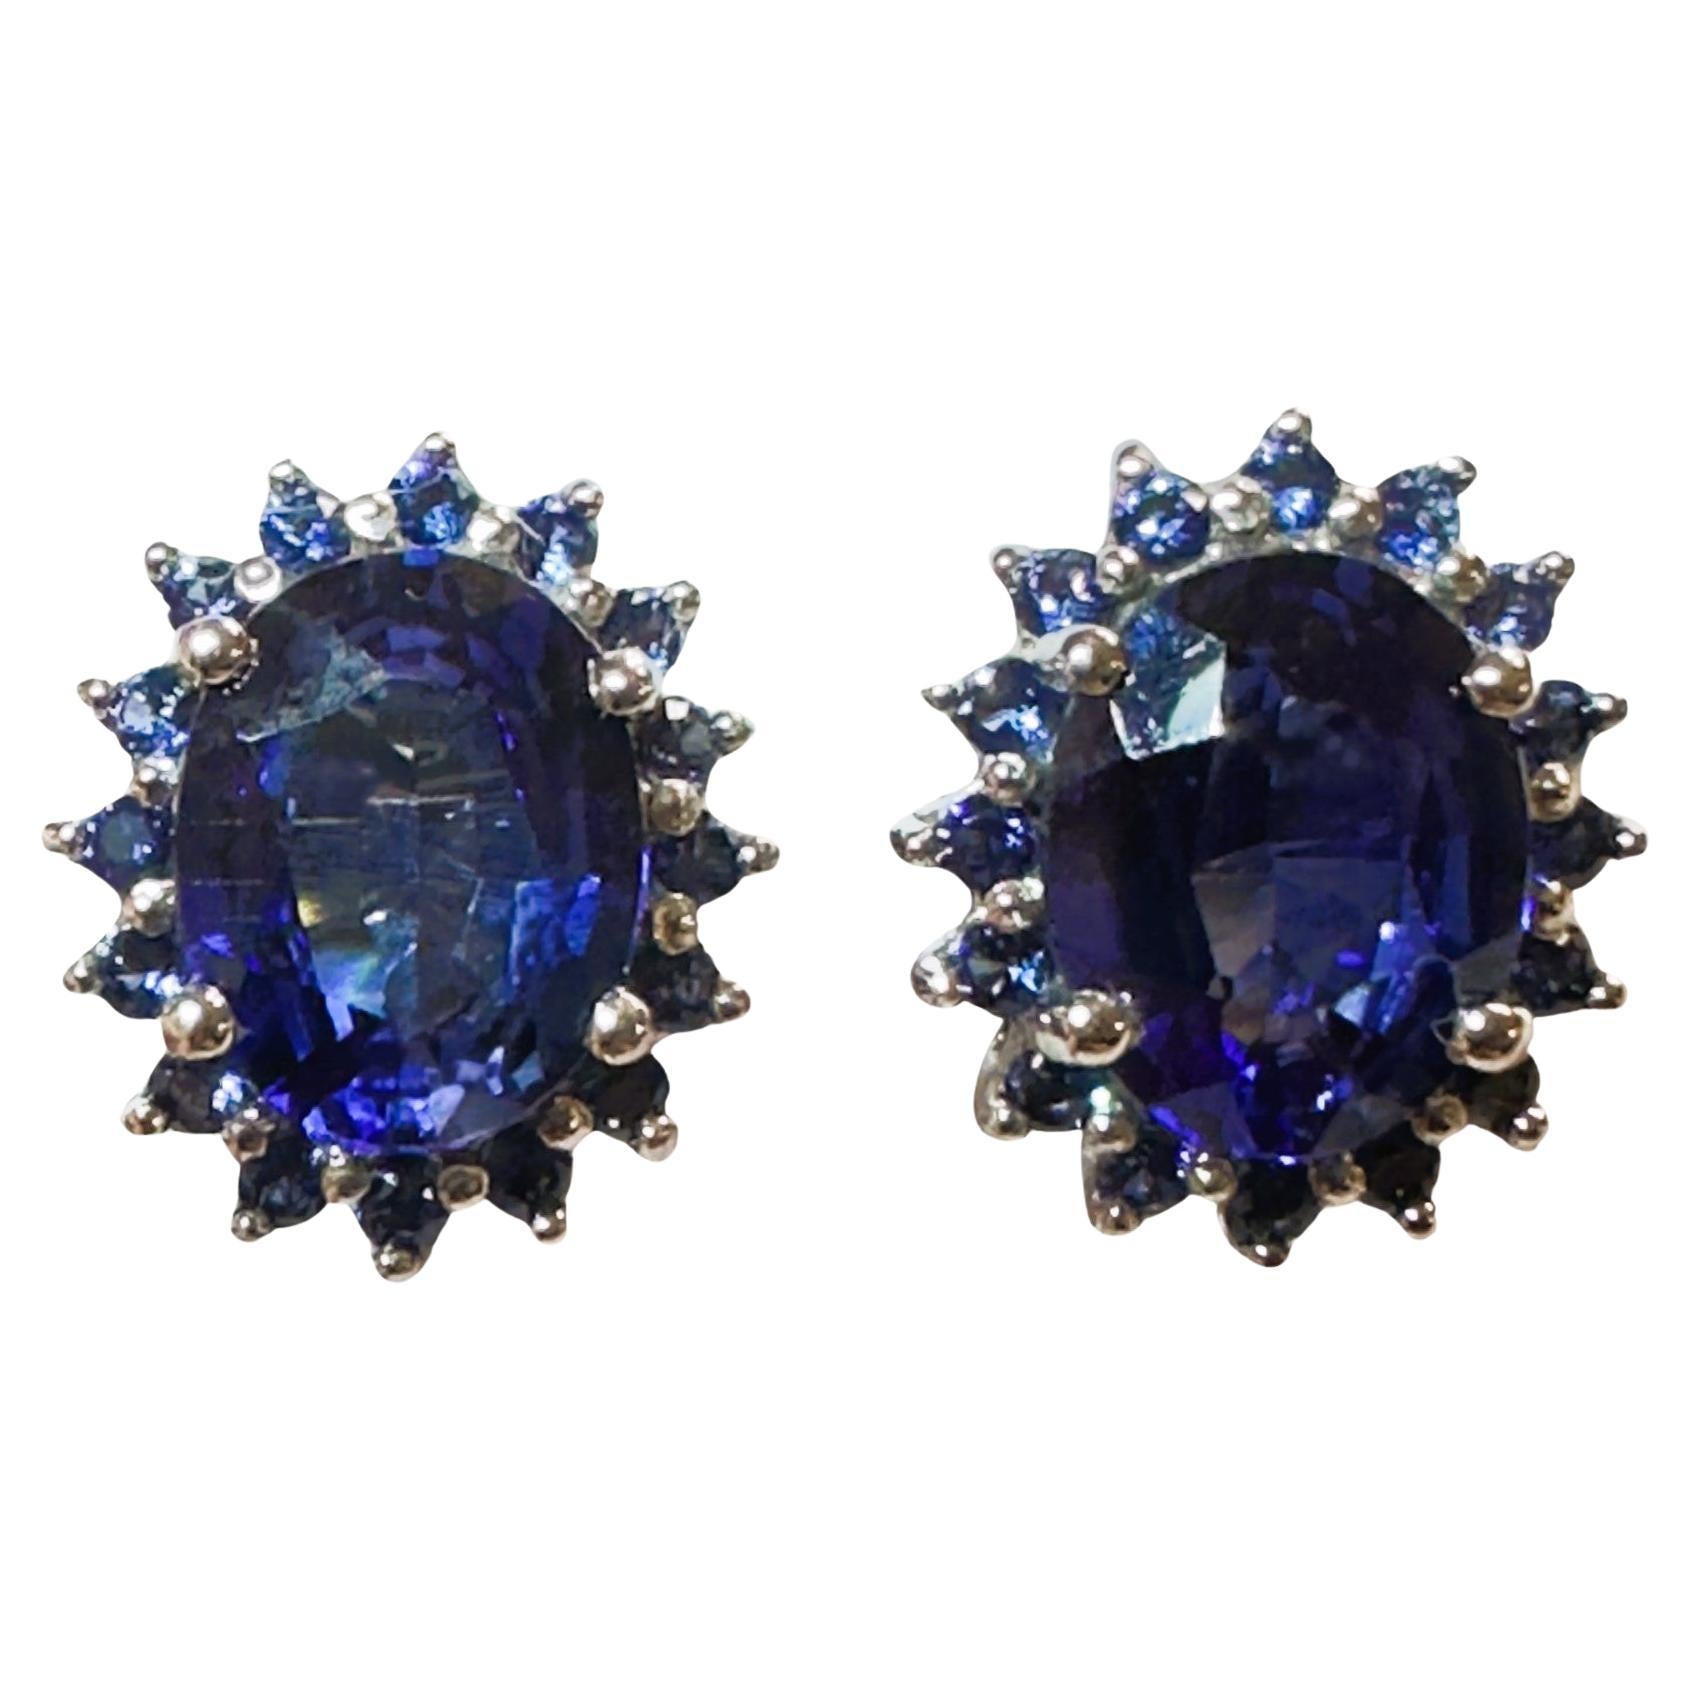 New African 3.90 ct Royal Blue Sapphire Sterling Earrings